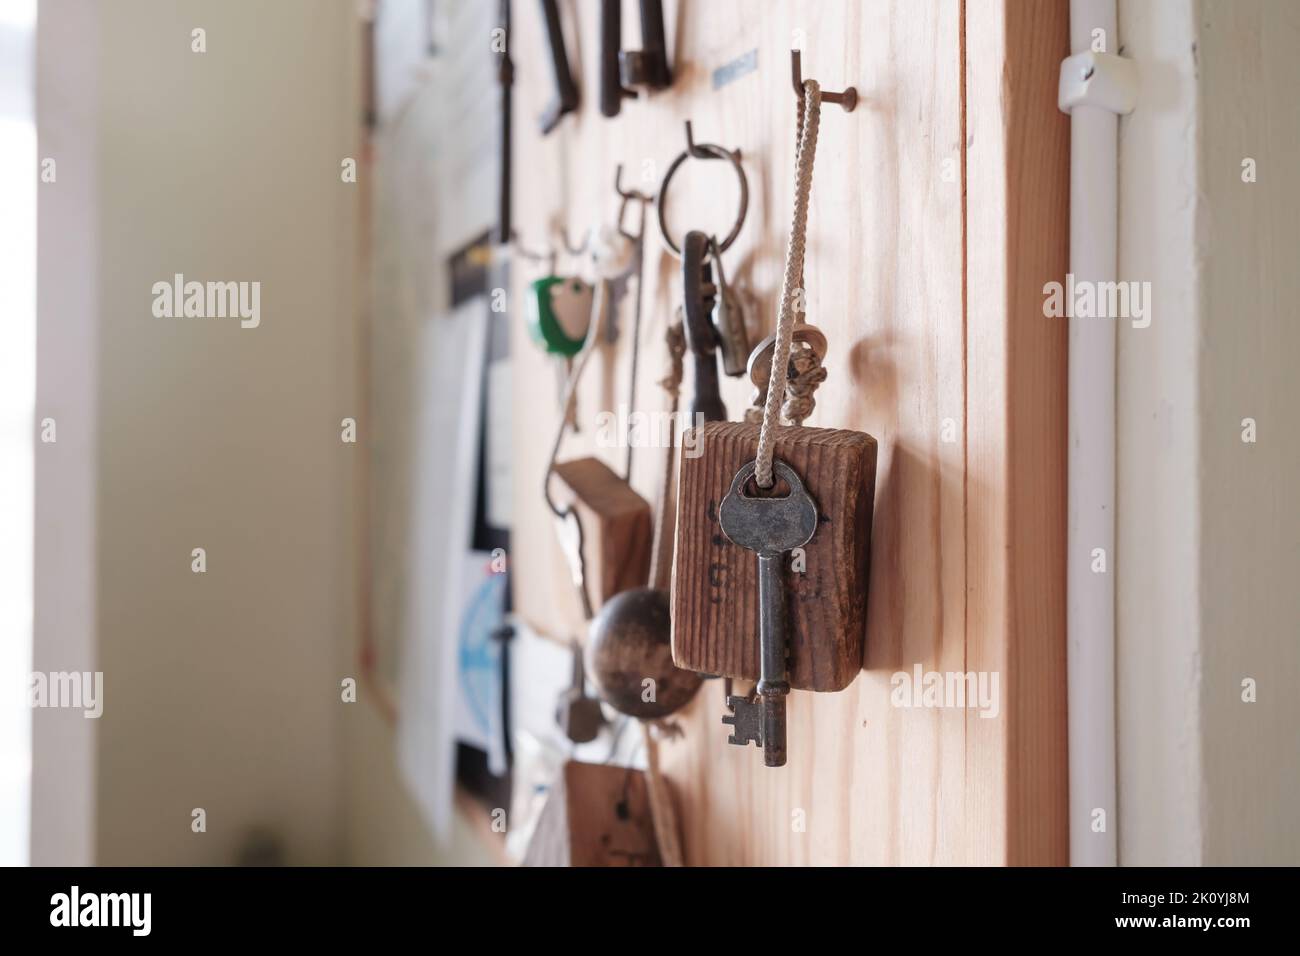 Vintage door key with a wooden keychain hangs on a hook on a board, on a blurred background.  Stock Photo